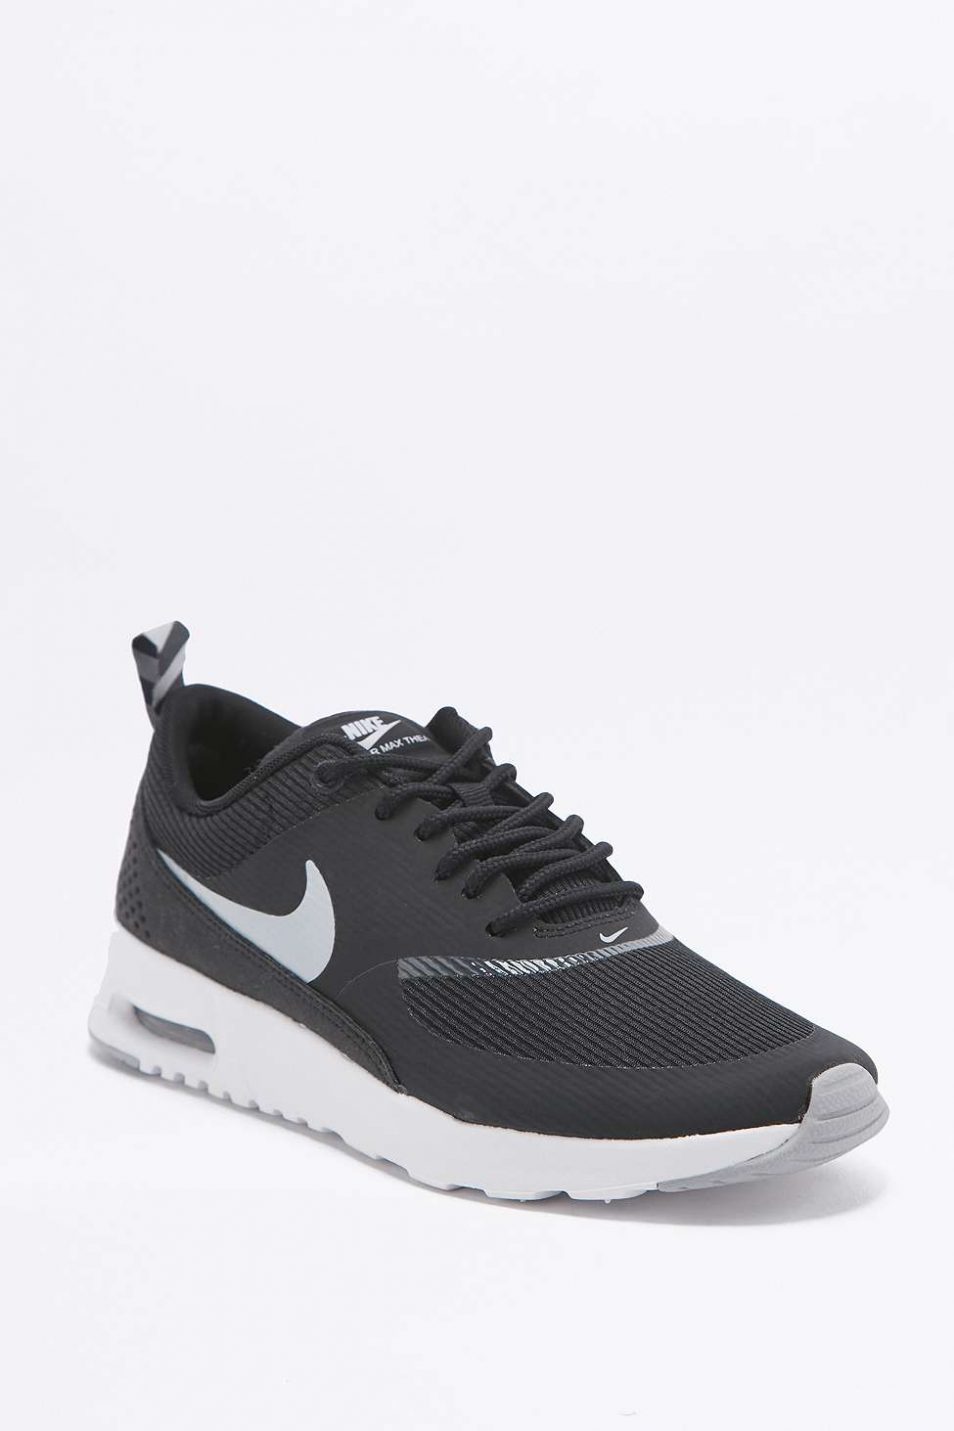 Nike Air Max Thea Black and White Trainers - 95Gallery.com